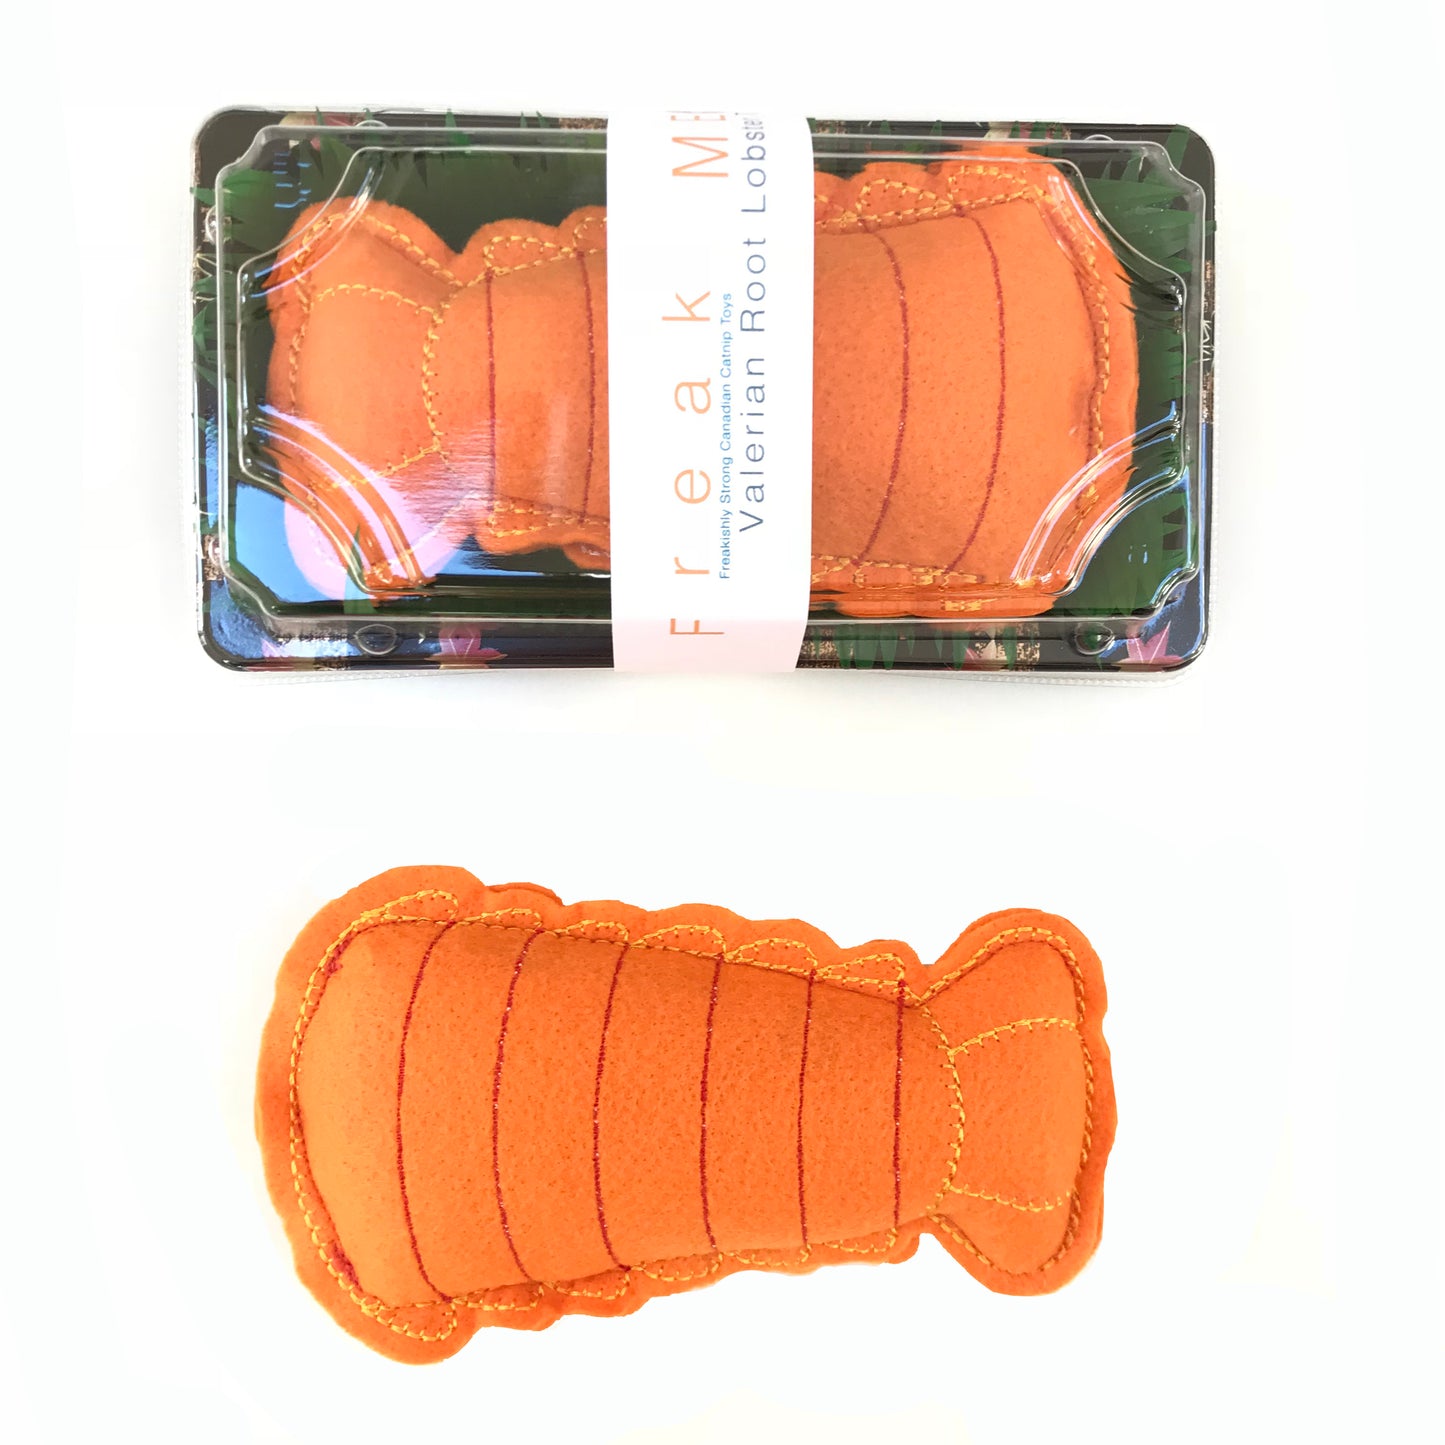 Freak Meowt Luxury Cat Toys, Gifts for Cats Valerian Root Lobster Tail, Best Cat Toys, Handmade in Wales